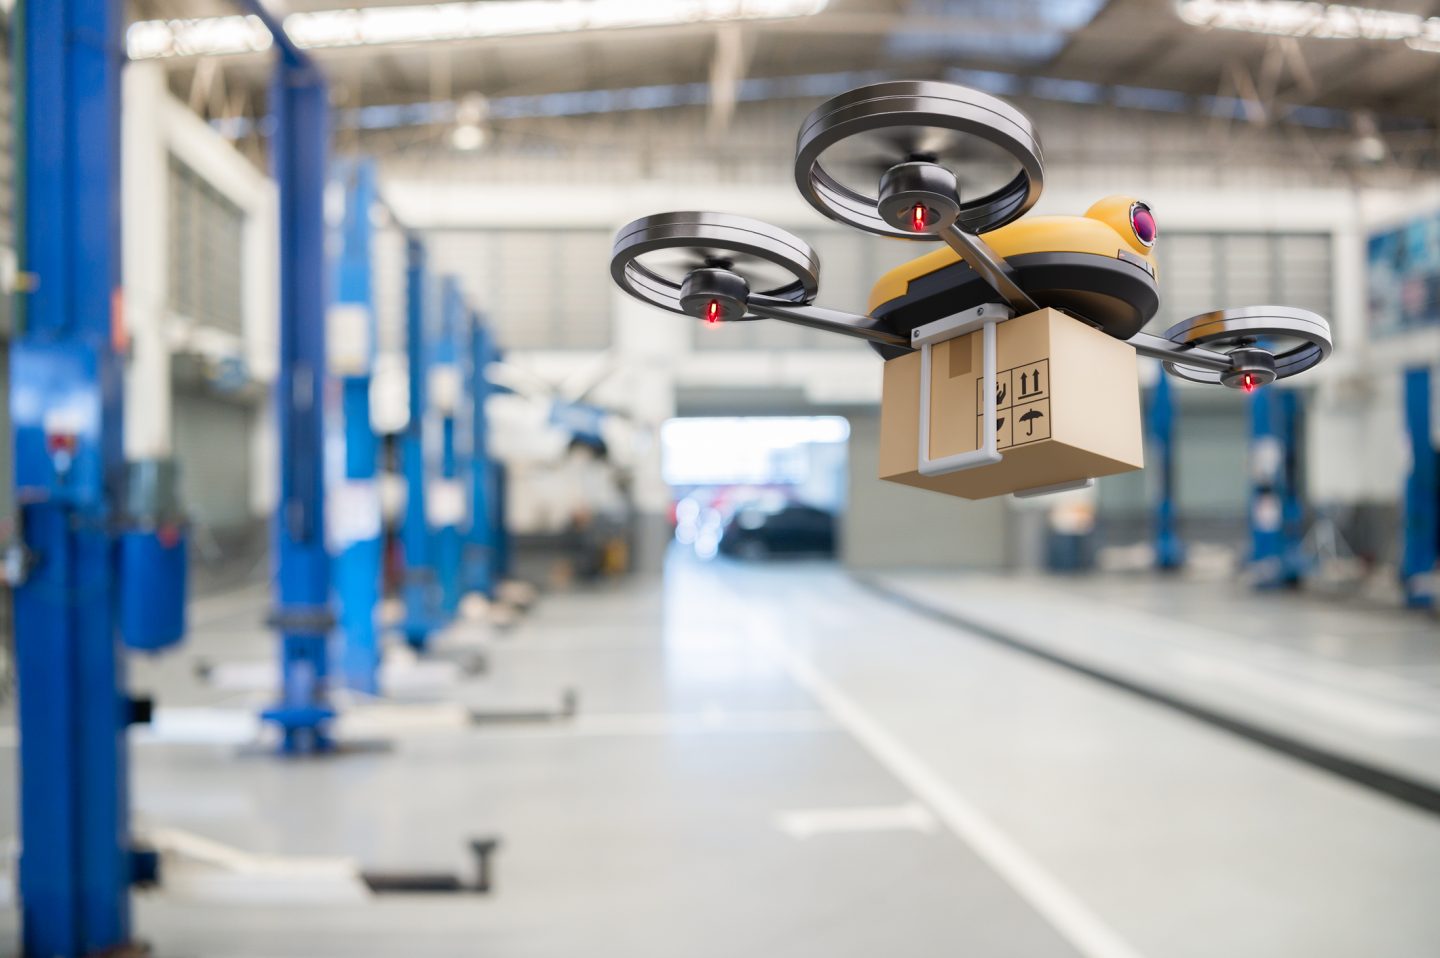 Drone delivering package in warehouse.